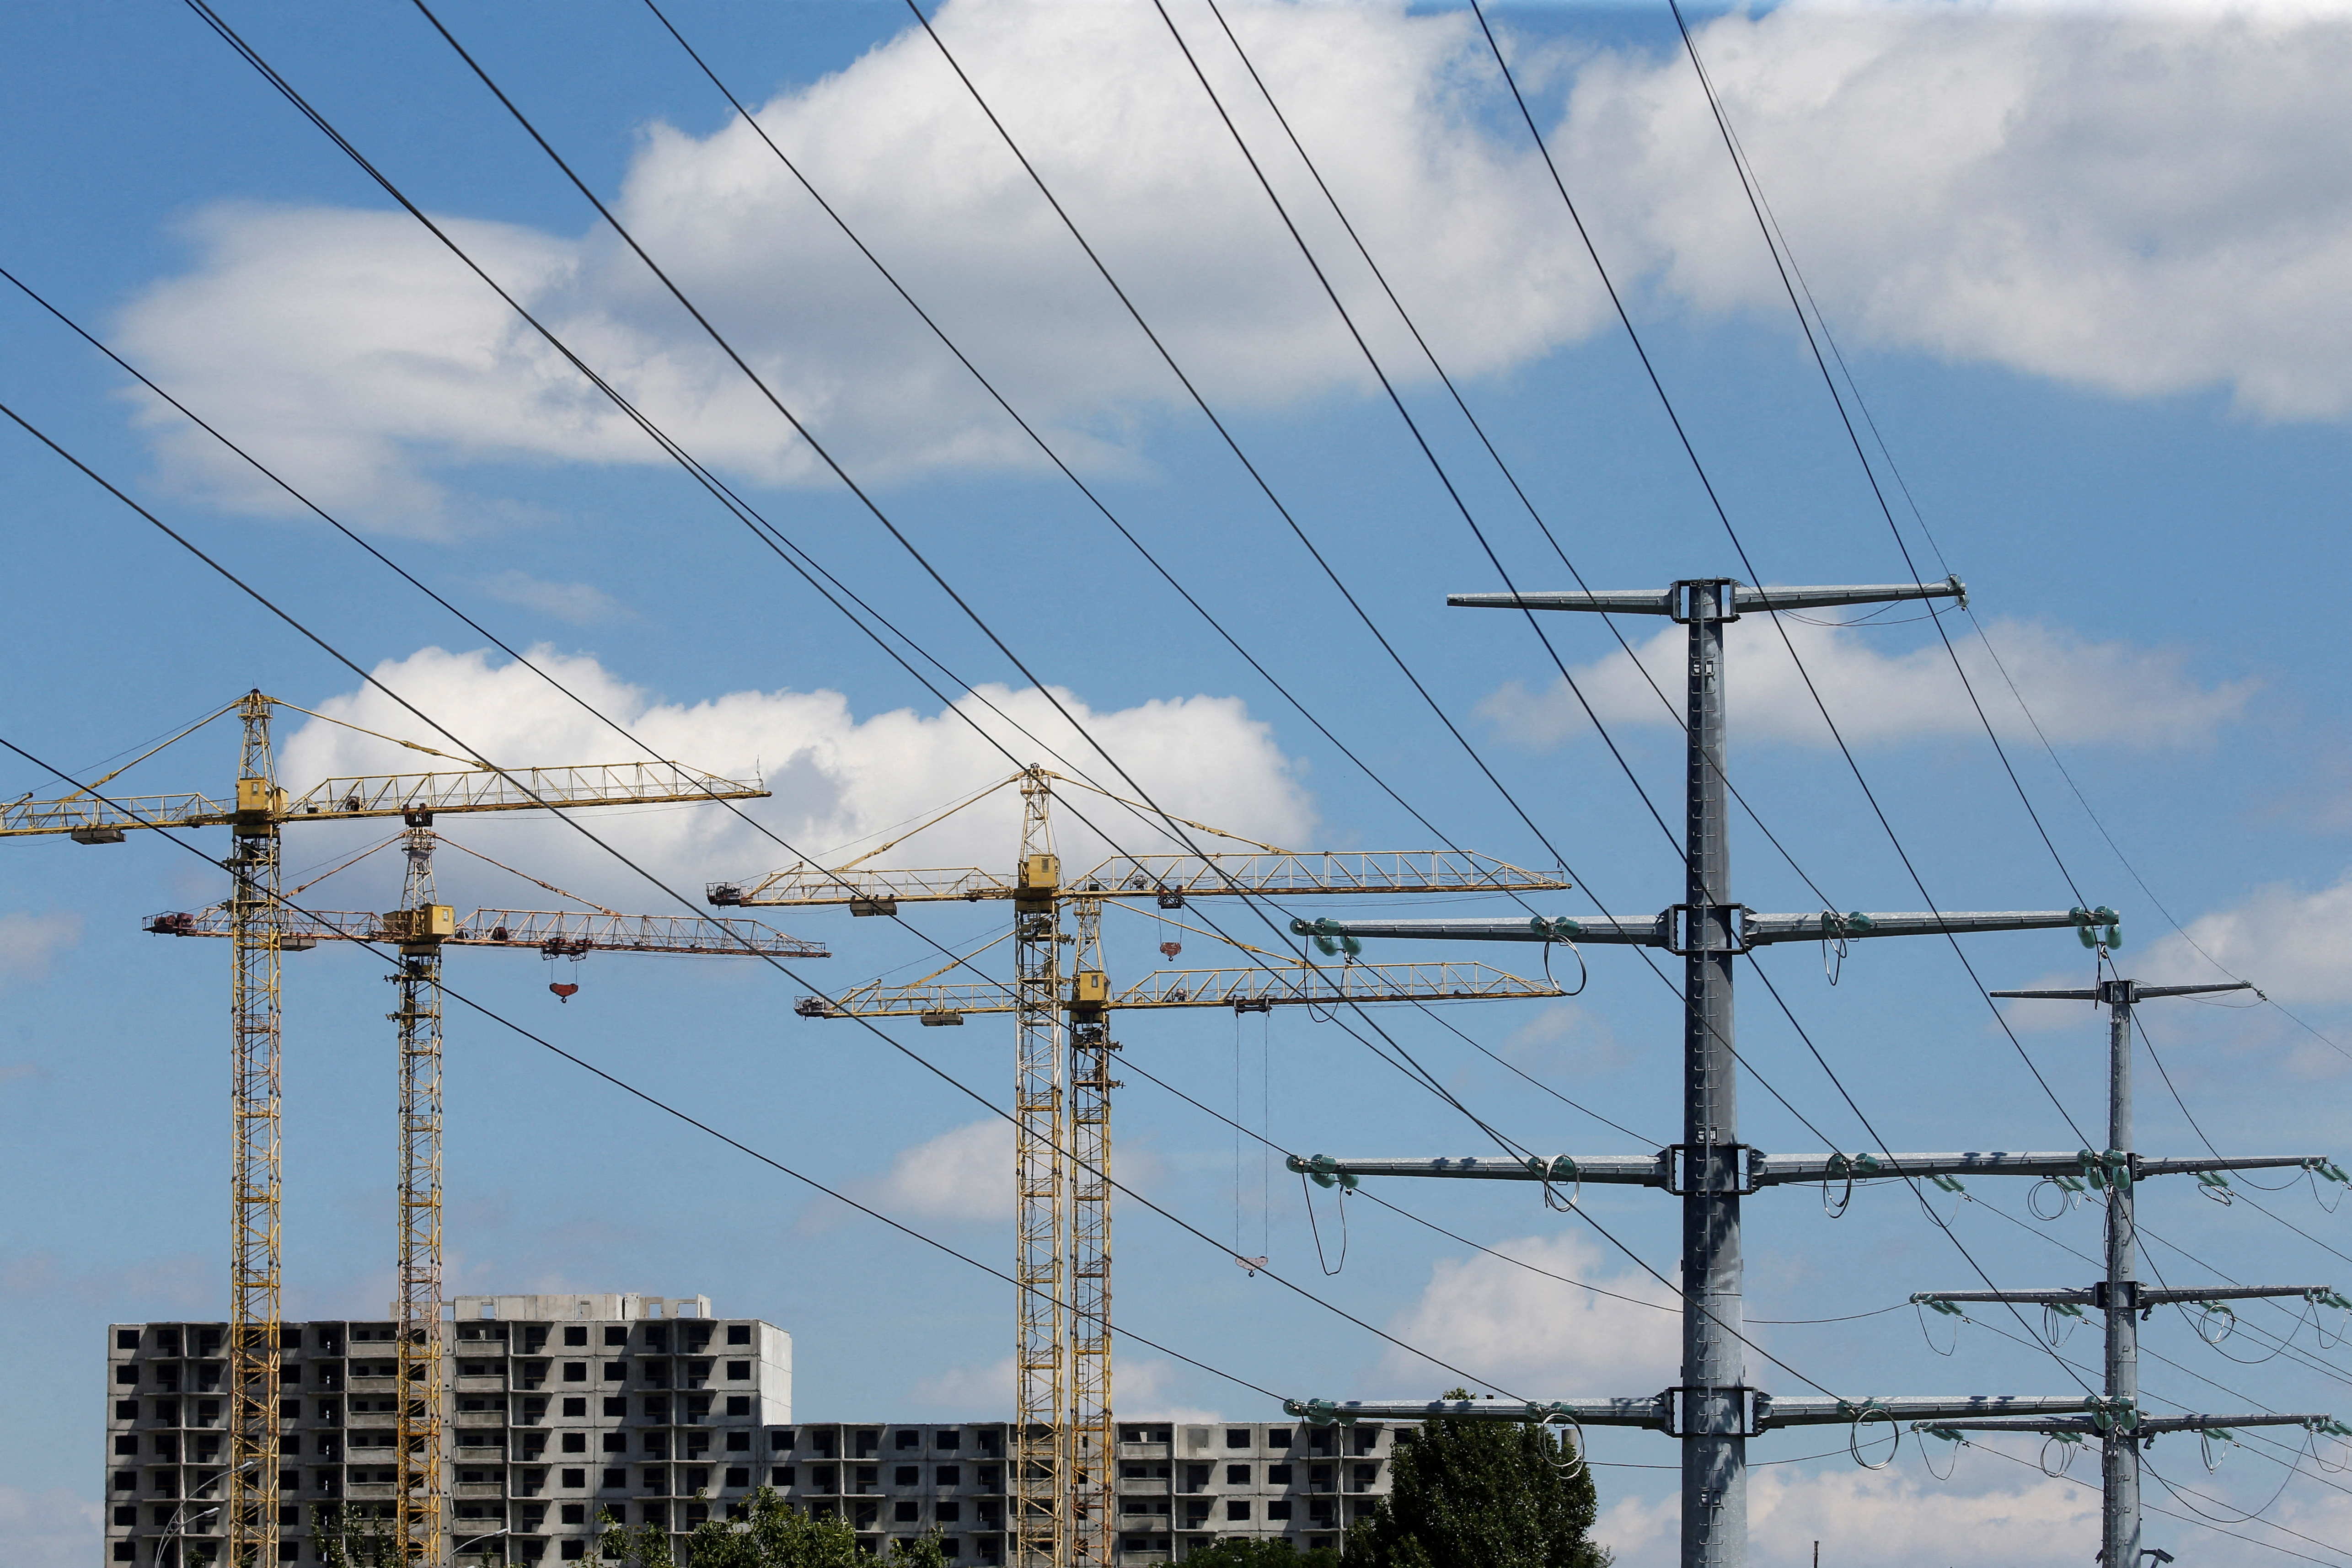 Building cranes and power lines connecting pylons of high-tension electricity are seen in Kyiv